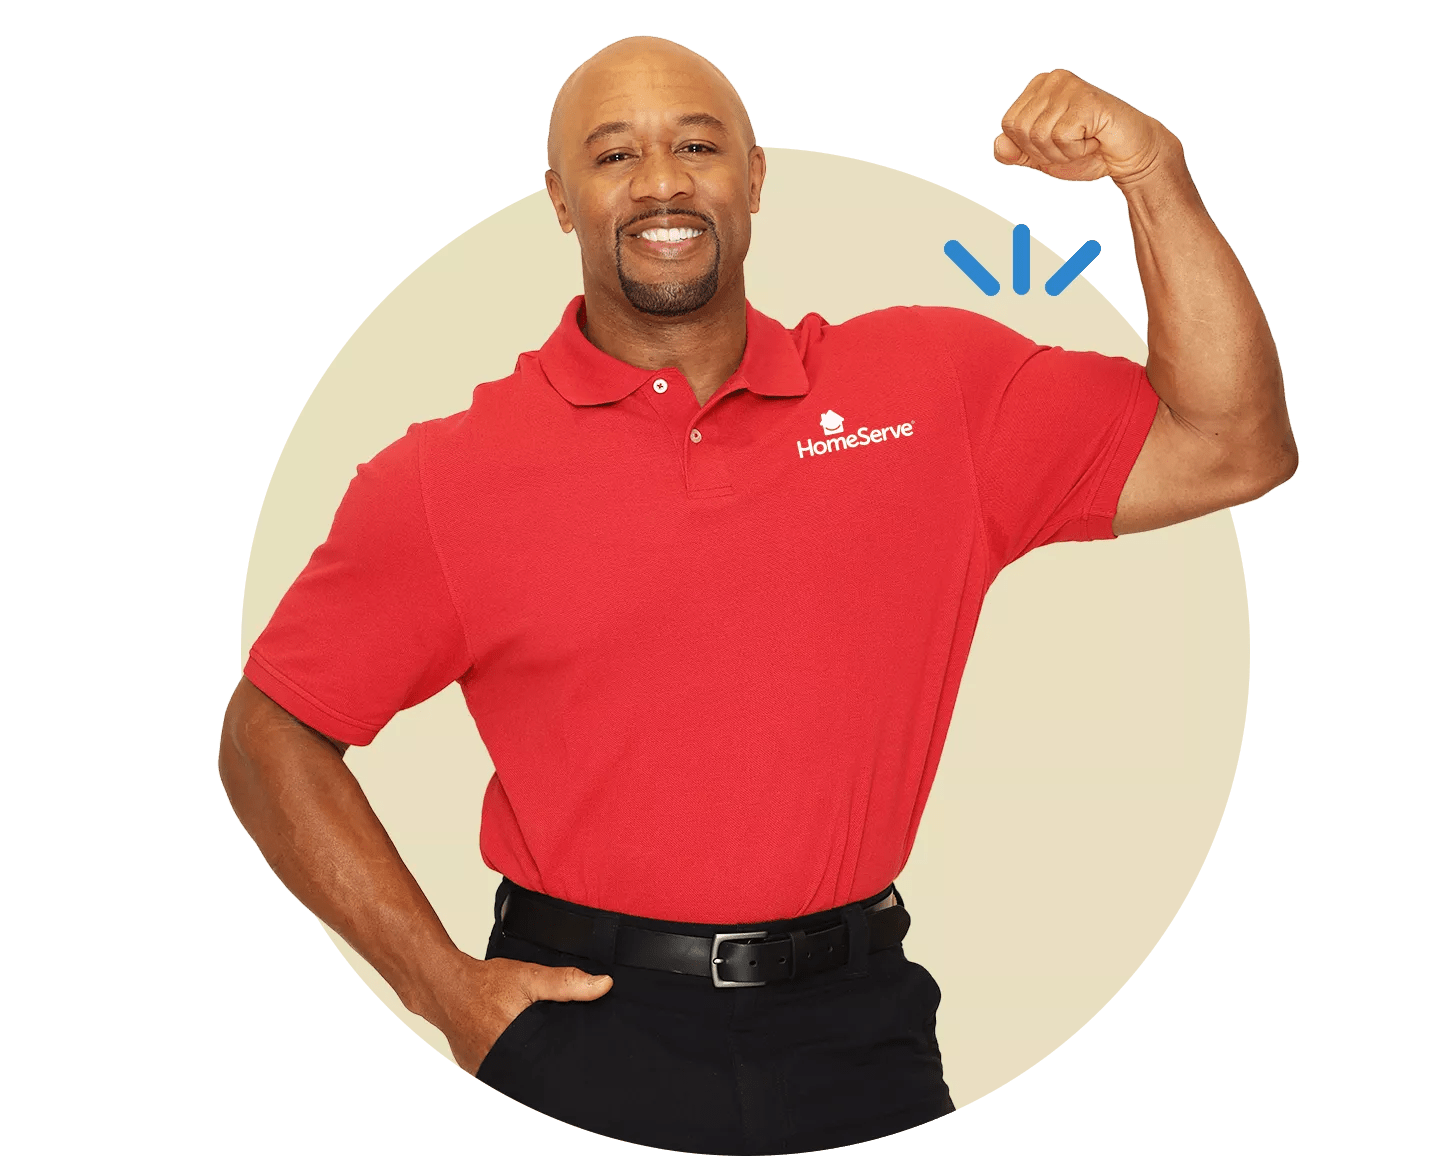 HomeServe technician in a red shirt flexing his bicep and looking strong